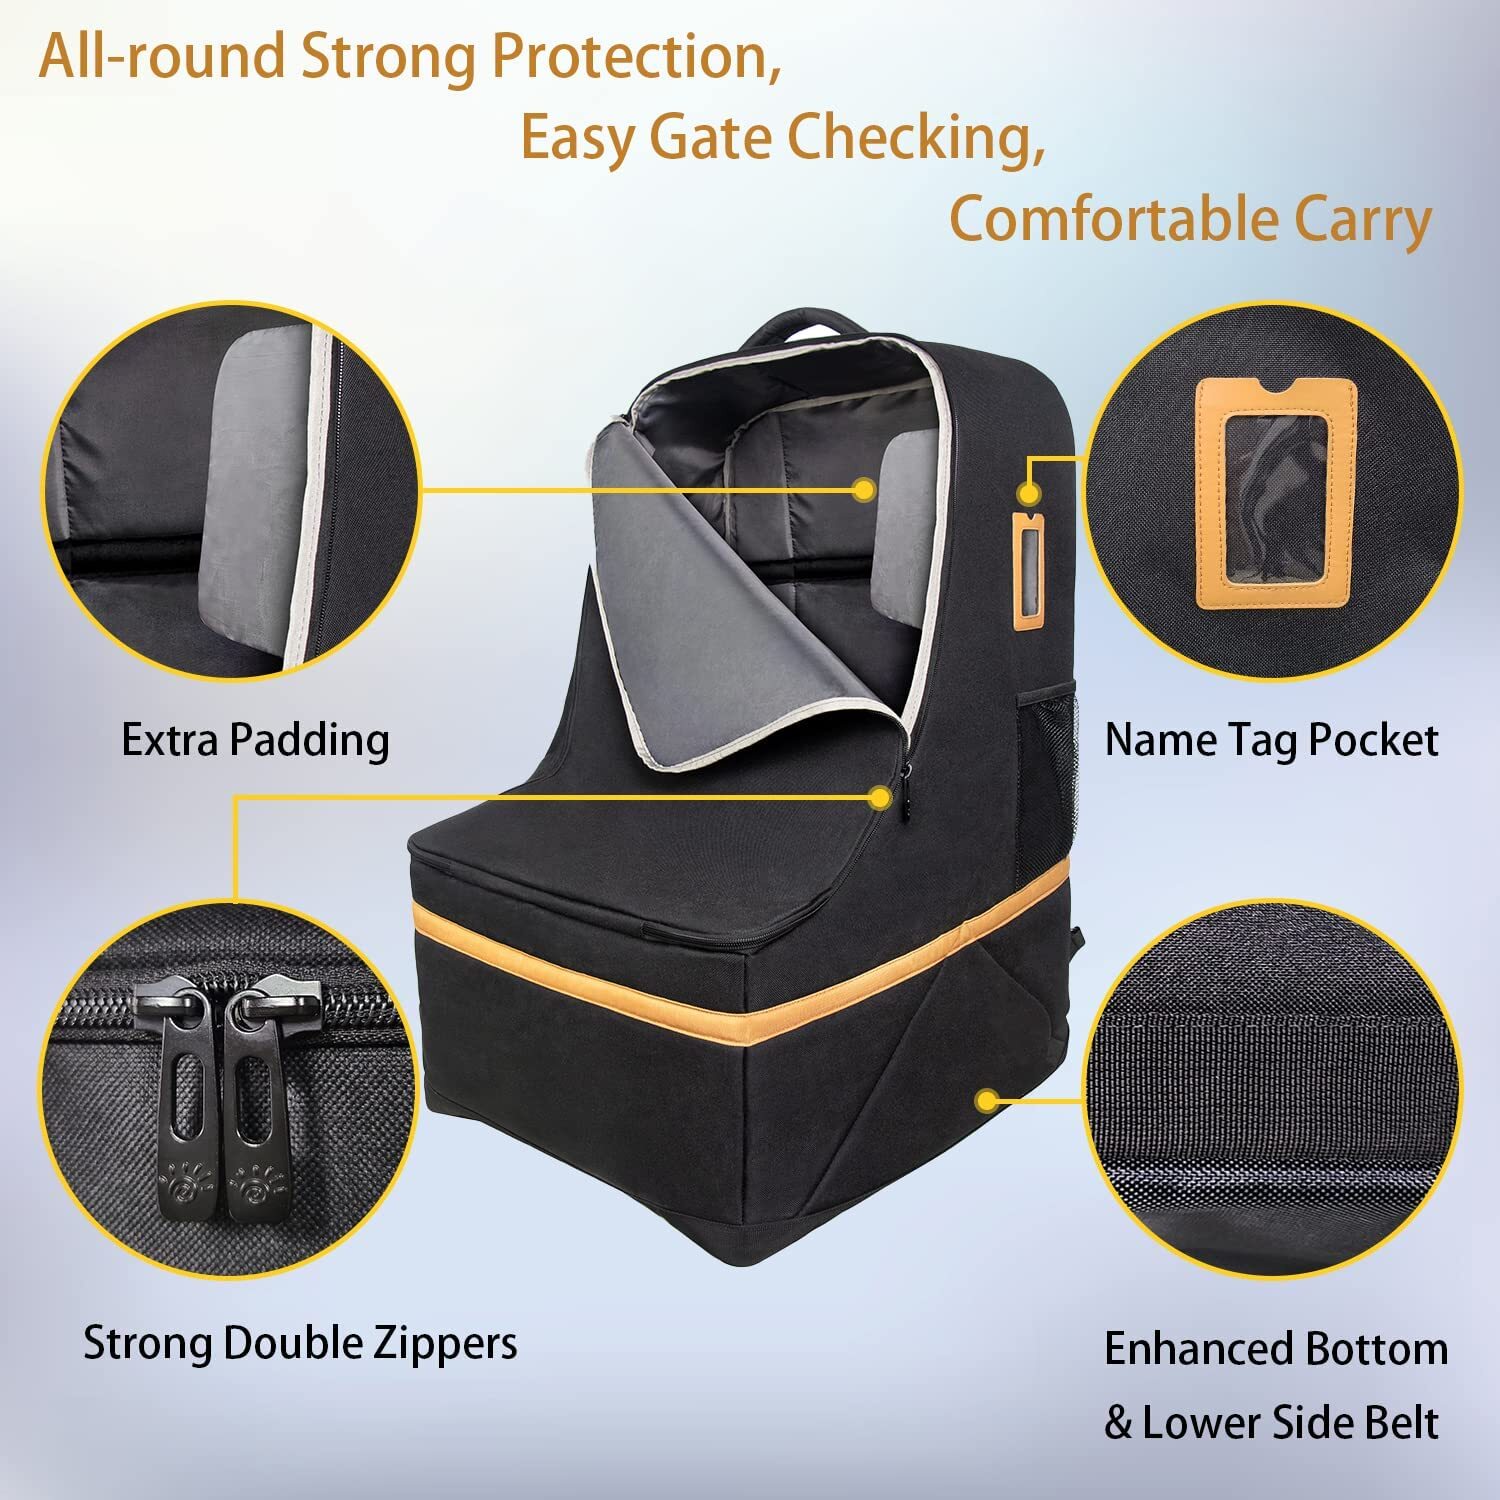 Simple Being Car Seat Travel Bag — SimplyLife Home